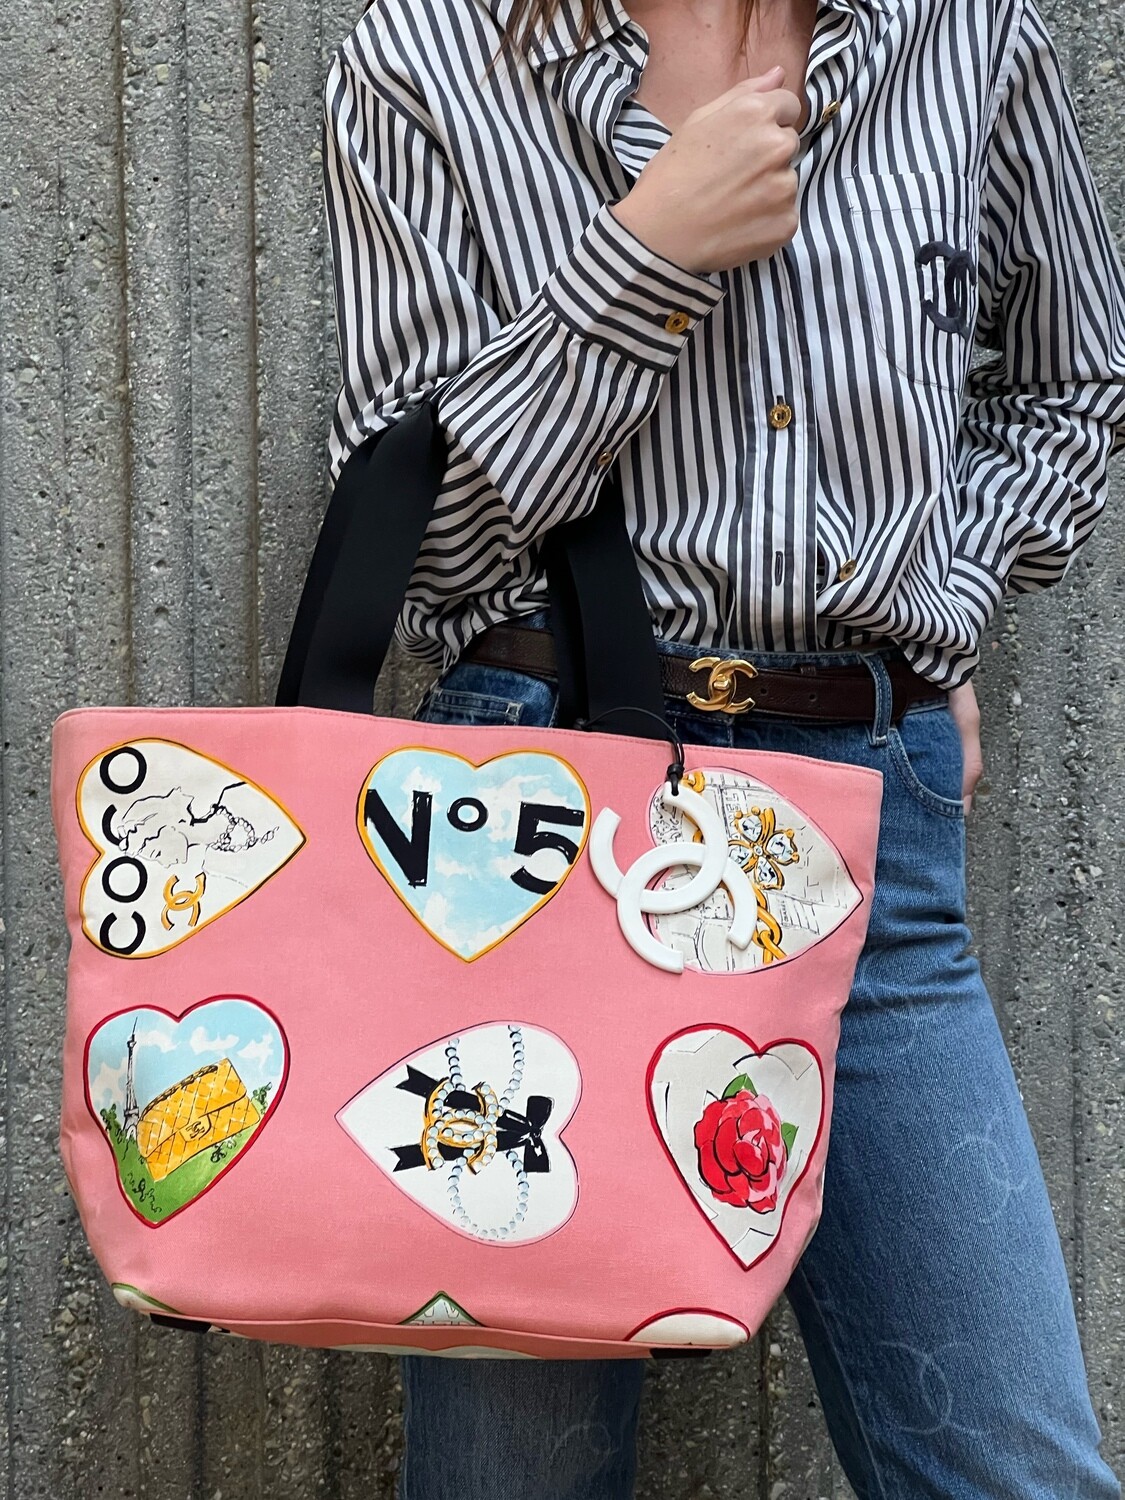 CHANEL CC COCO HEARTS VALENTINES PINK CANVAS TOTE BAG WITH HUGE CC CHARM